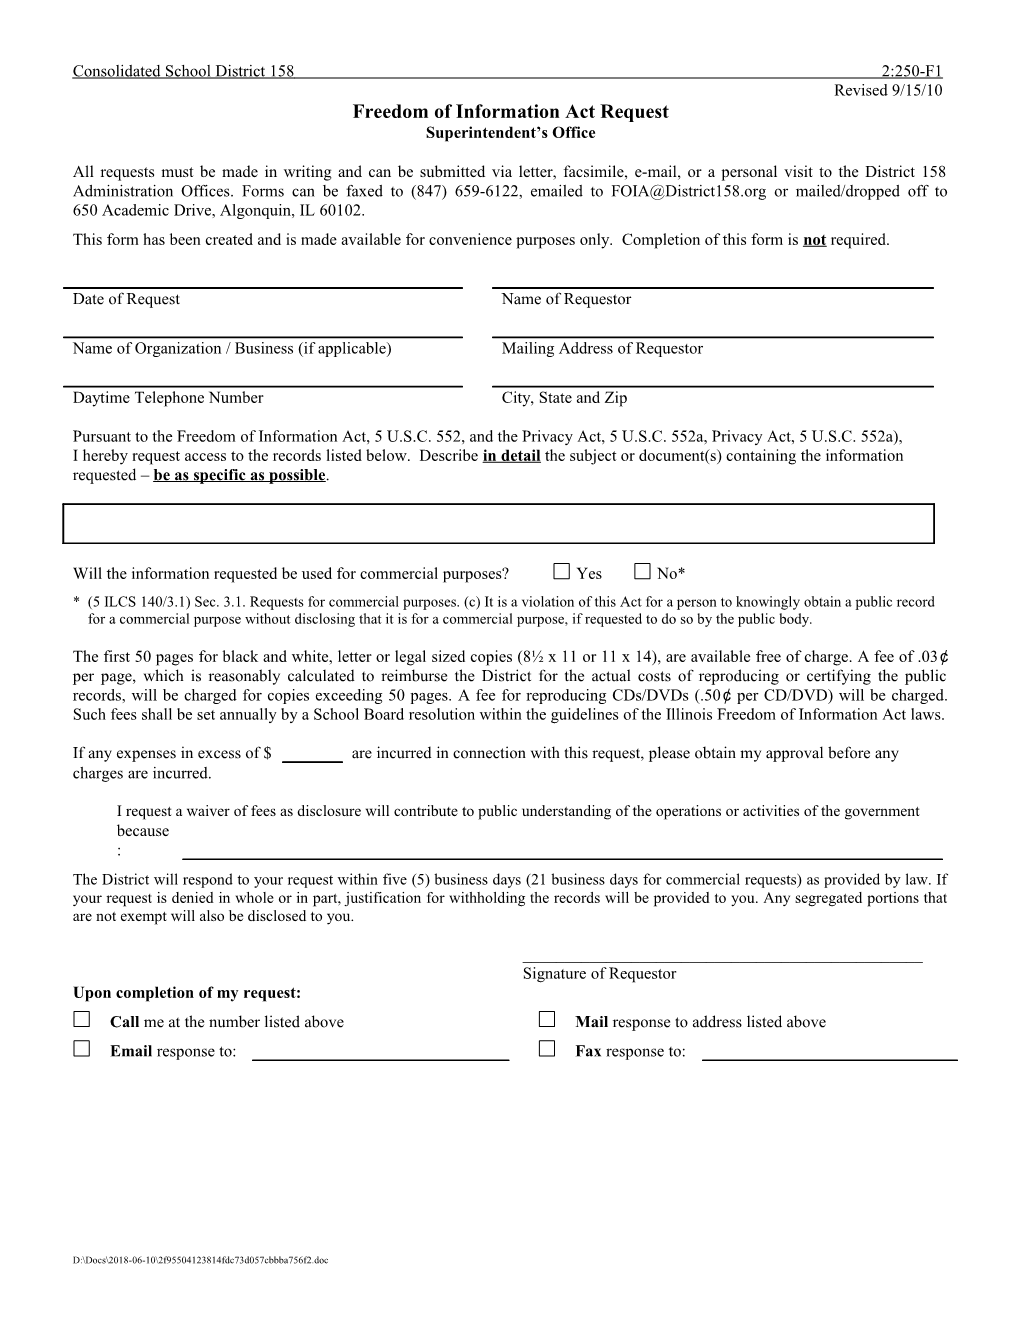 FORMS/Freedom of Information Act Request Form